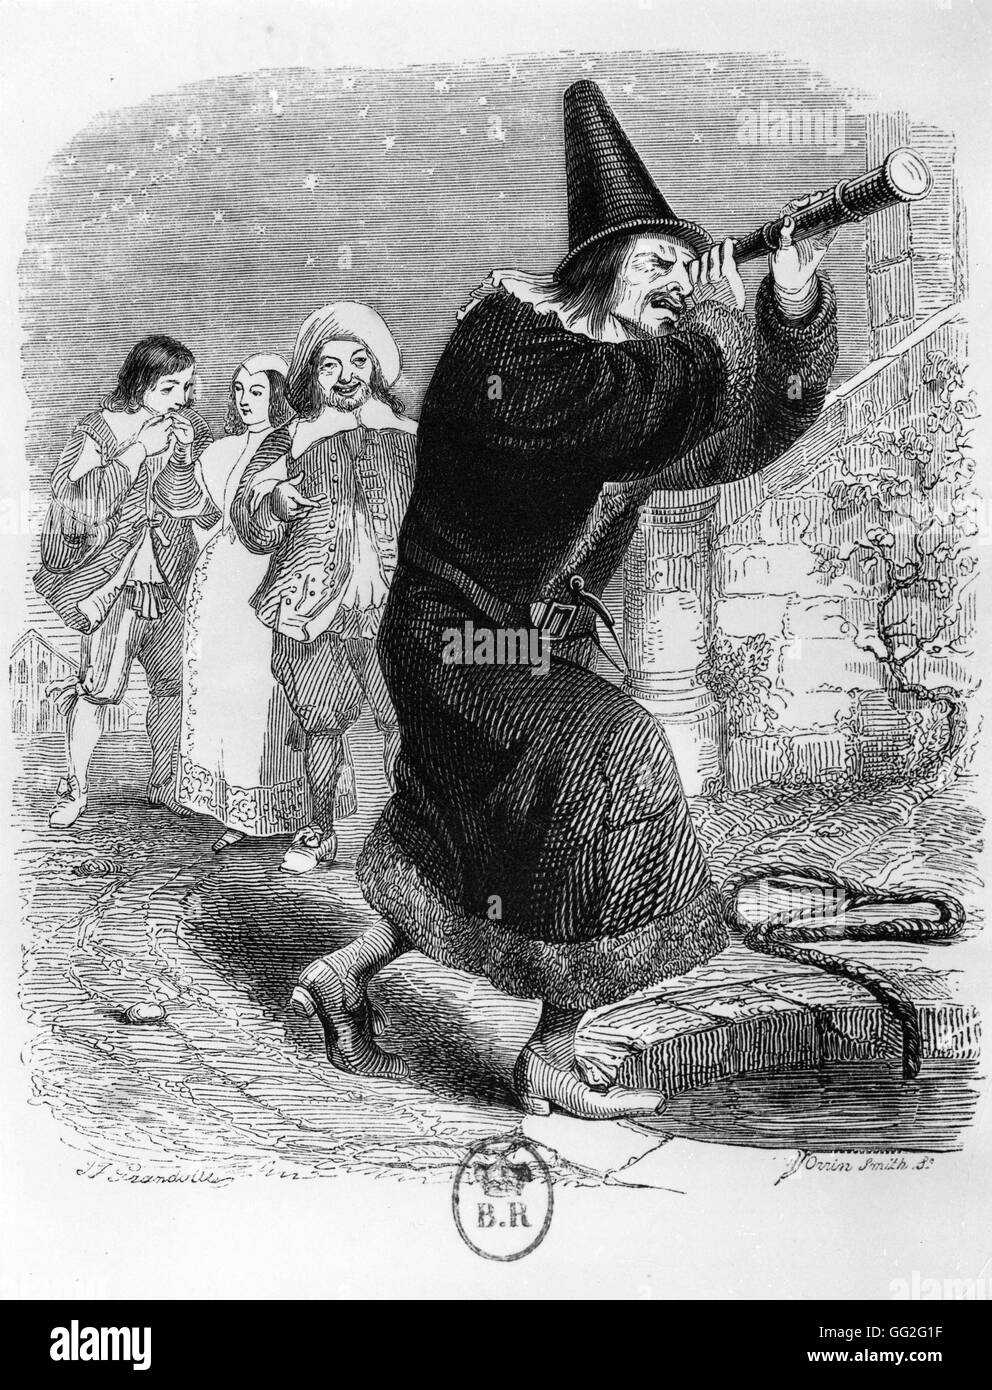 J.J. Grandville French school Illustration for the La Fontaine's Fables: The Astrologer who Fell into a Well 19th century Engraving Paris, Bibliothèque Nationale de France Stock Photo